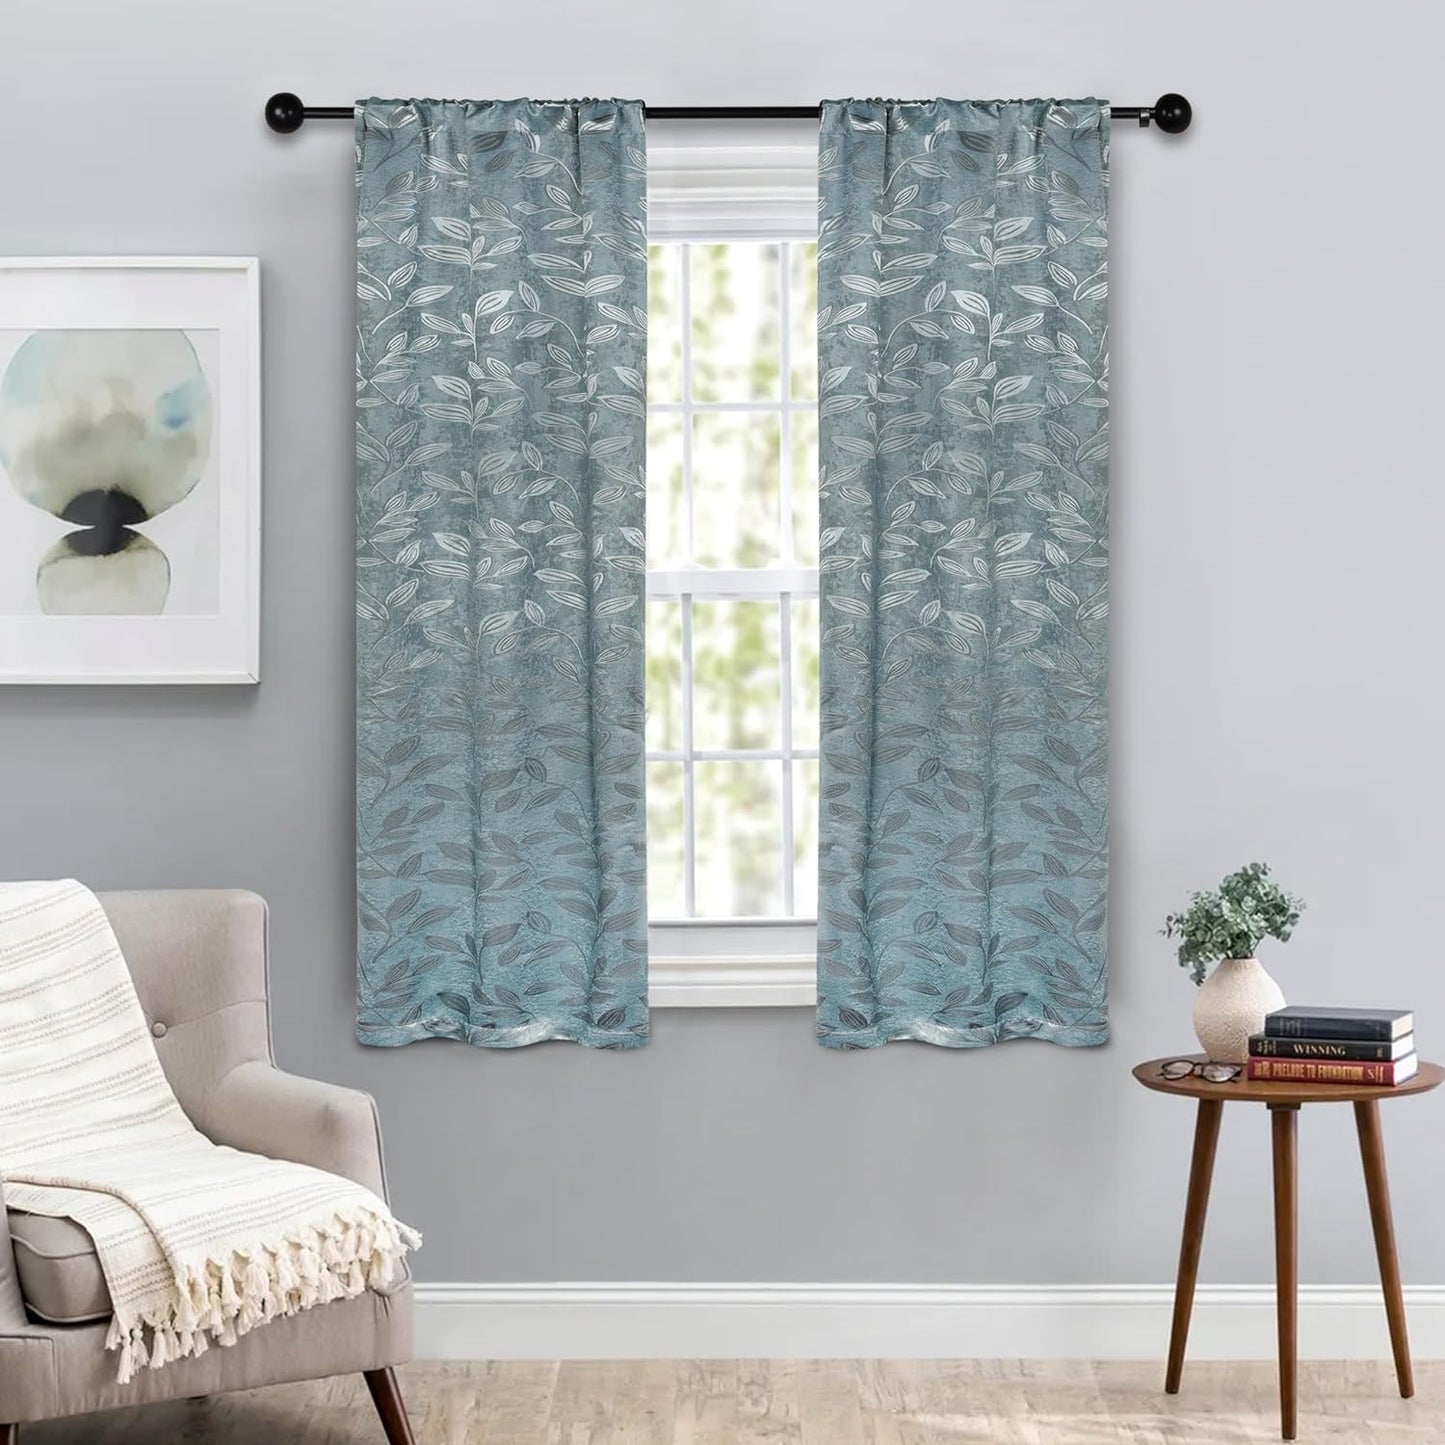 Superior Blackout Curtains, Room Darkening Window Accent for Bedroom, Sun Blocking, Thermal, Modern Bohemian Curtains, Leaves Collection, Set of 2 Panels, Rod Pocket - 52 in X 63 In, Nickel Black  Home City Inc. Green Lily 26 In X 63 In (W X L) 